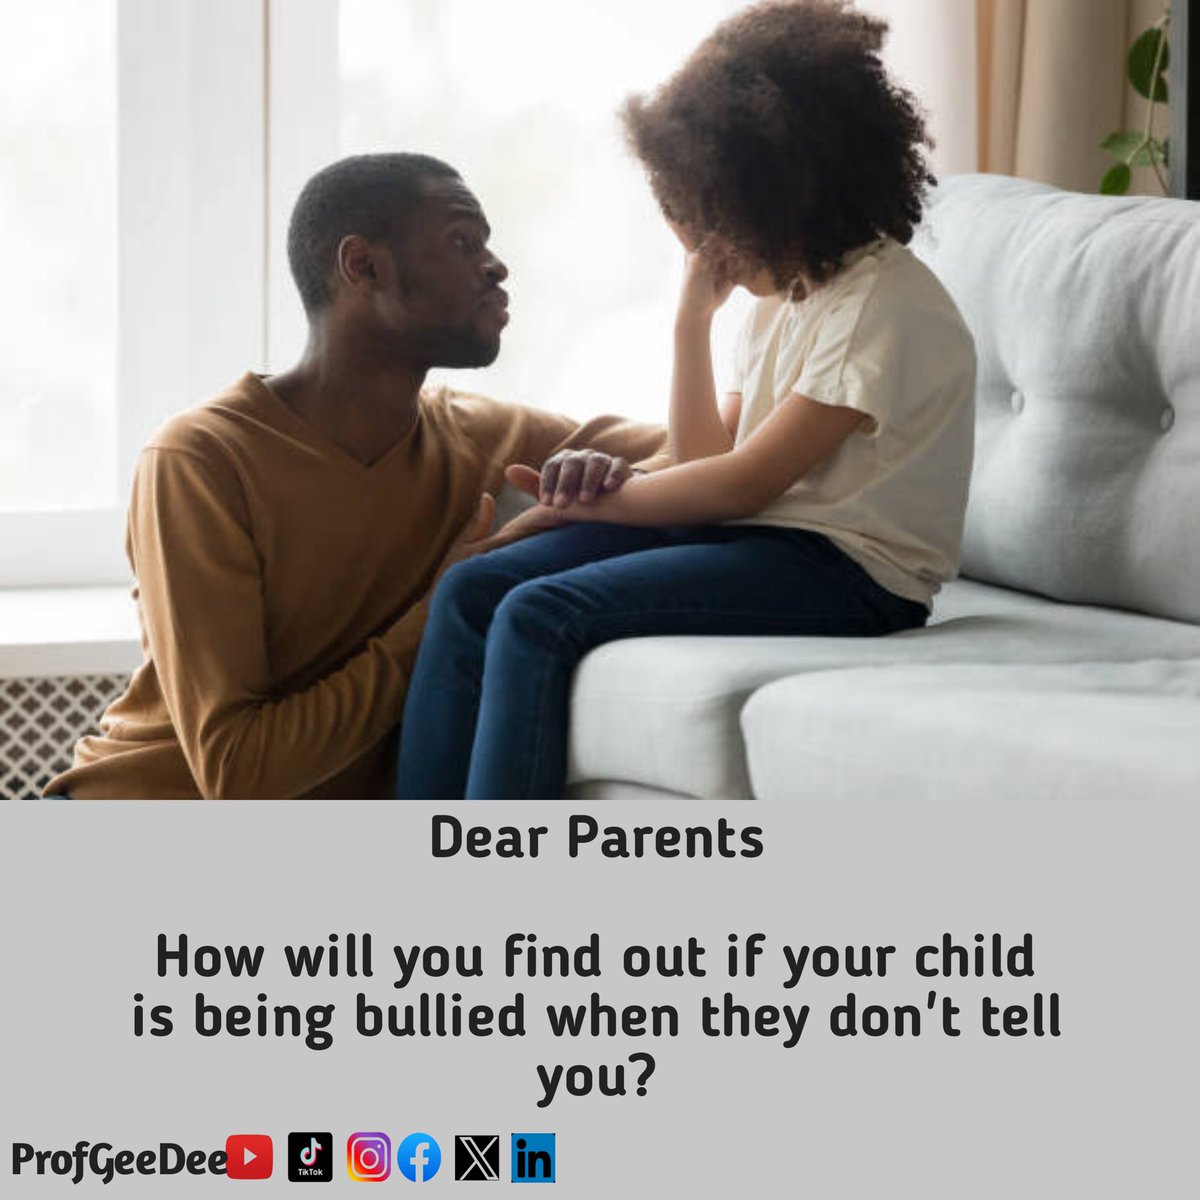 Encourage your children to share their thoughts and feelings about bullying and make them understand the importance of standing up for others and speaking up when necessary.

#earlyyears
#earlylearning
#earlychildhooddevelopment
#dearparentseries
#profgeedee